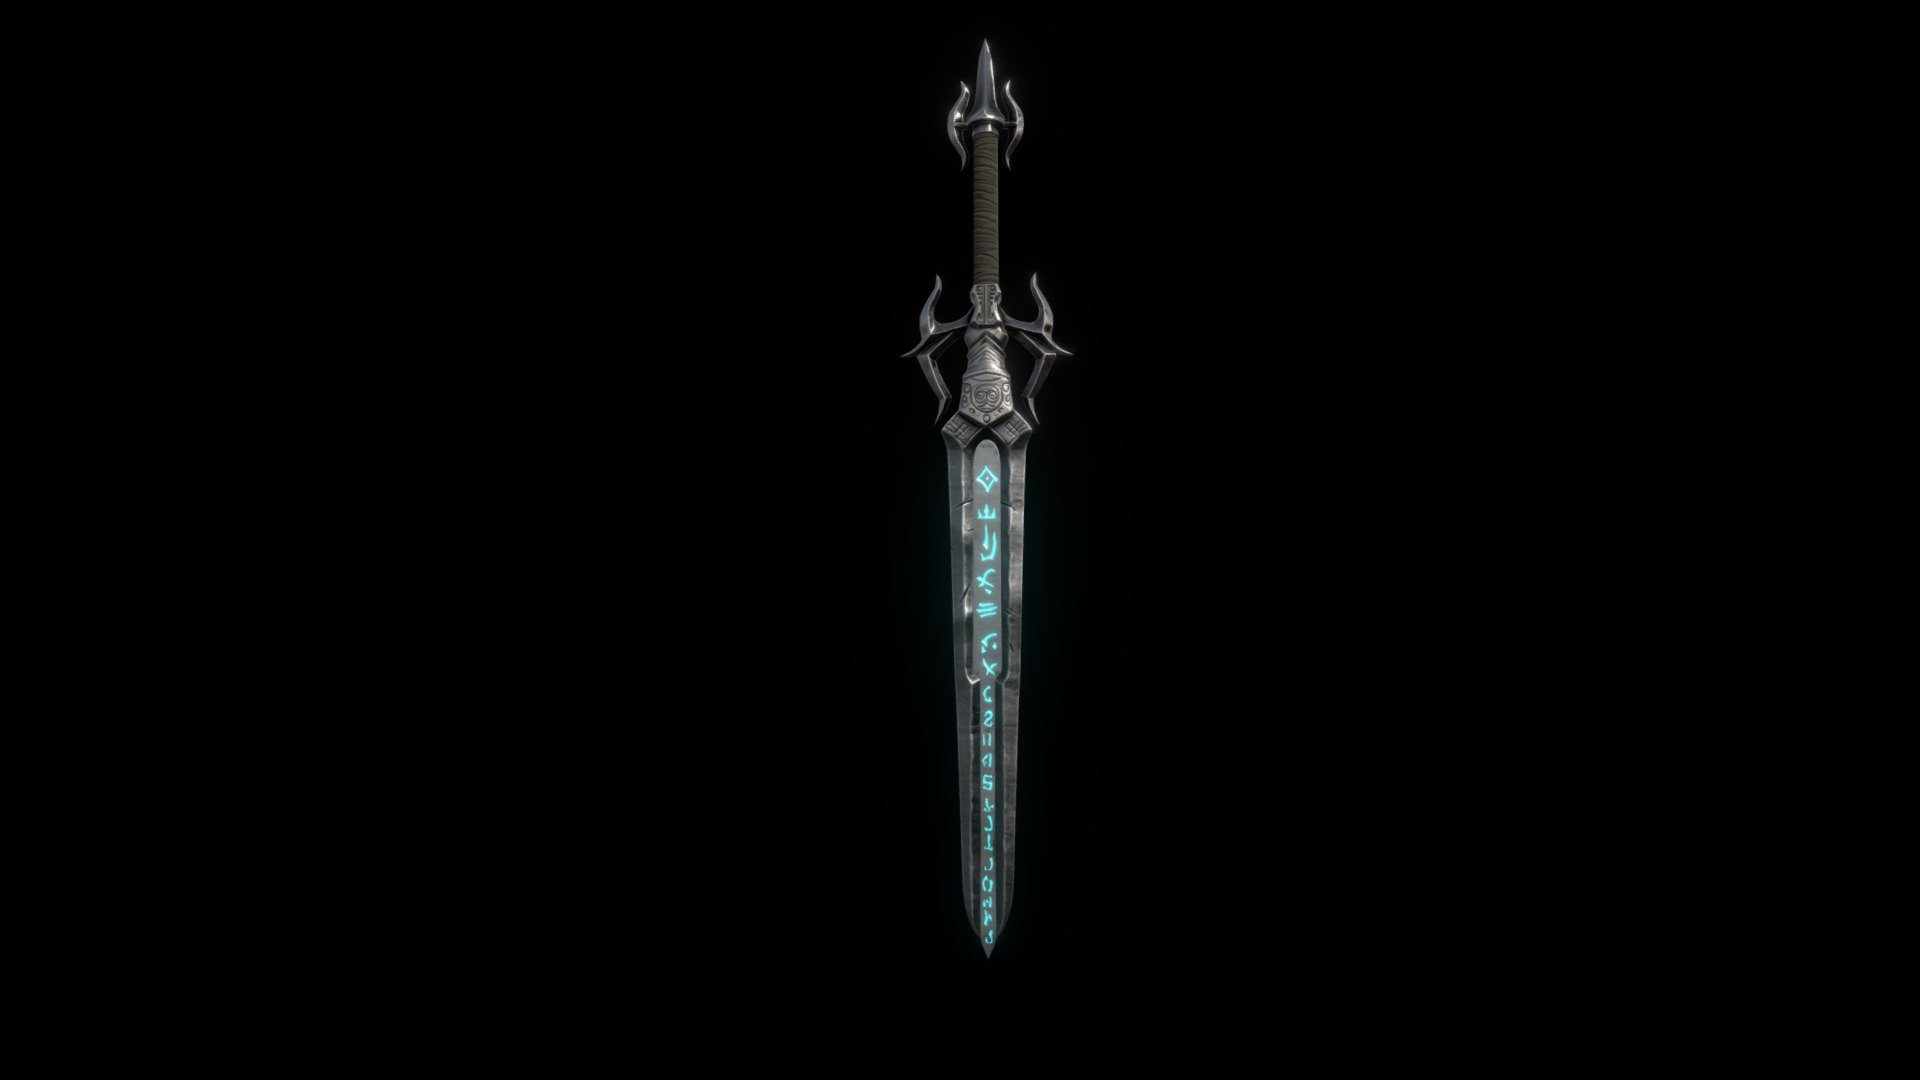 Excalibur Stylized Sword Lowpoly - 3D model by Prabhakor Biswas ...